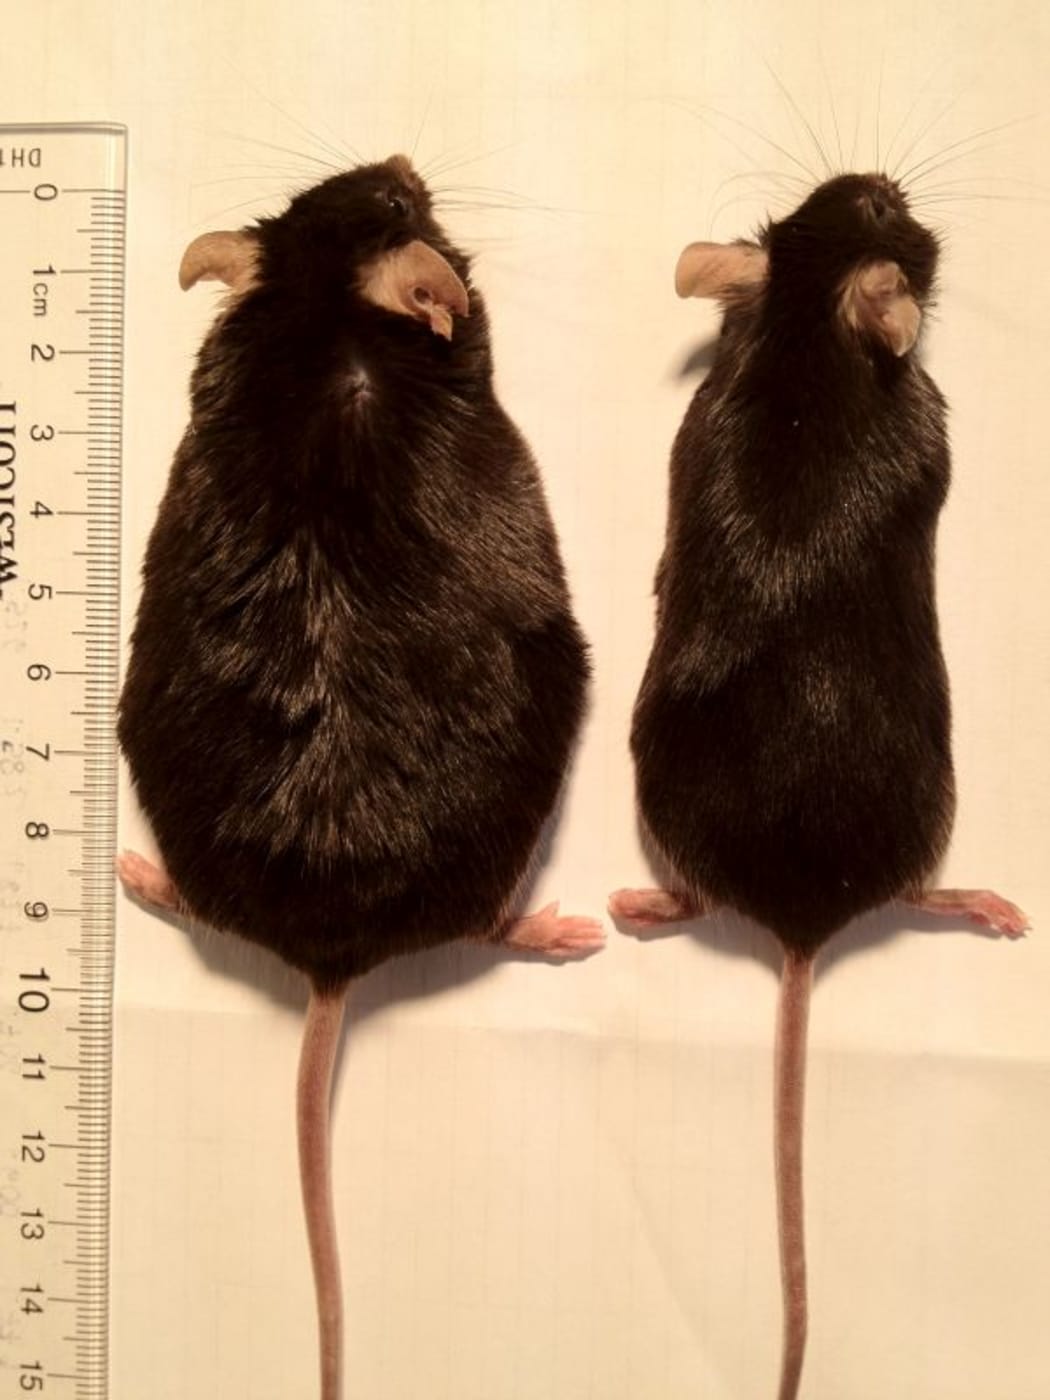 Mice on high fat diet, the one with loss of smell remains lean